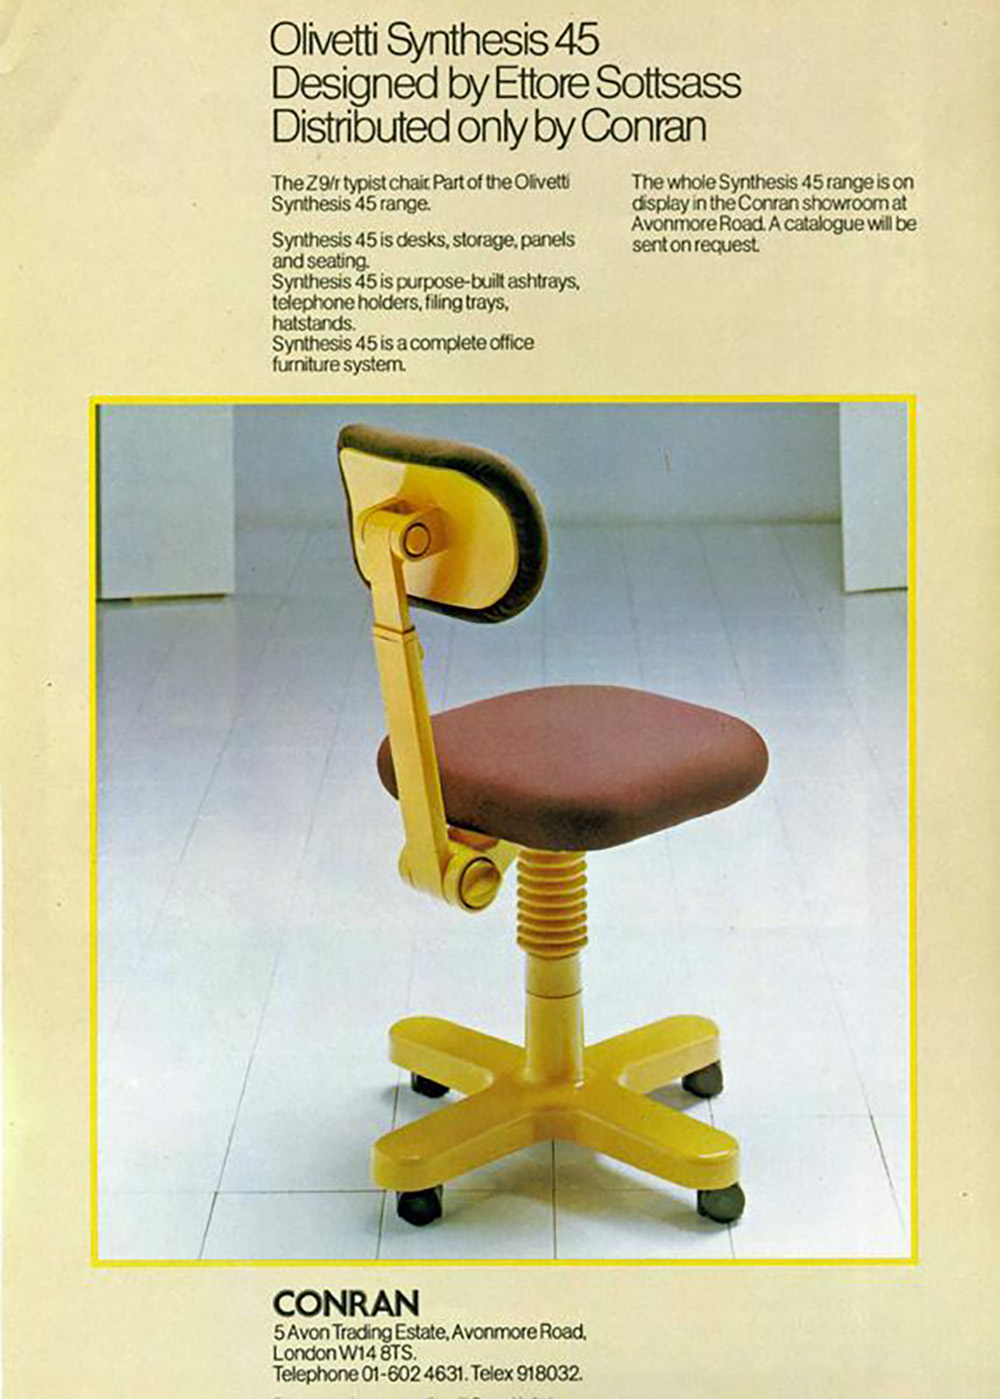 Desk Chair 45 Syntesis by Ettore Sottsass for Olivetti image 11